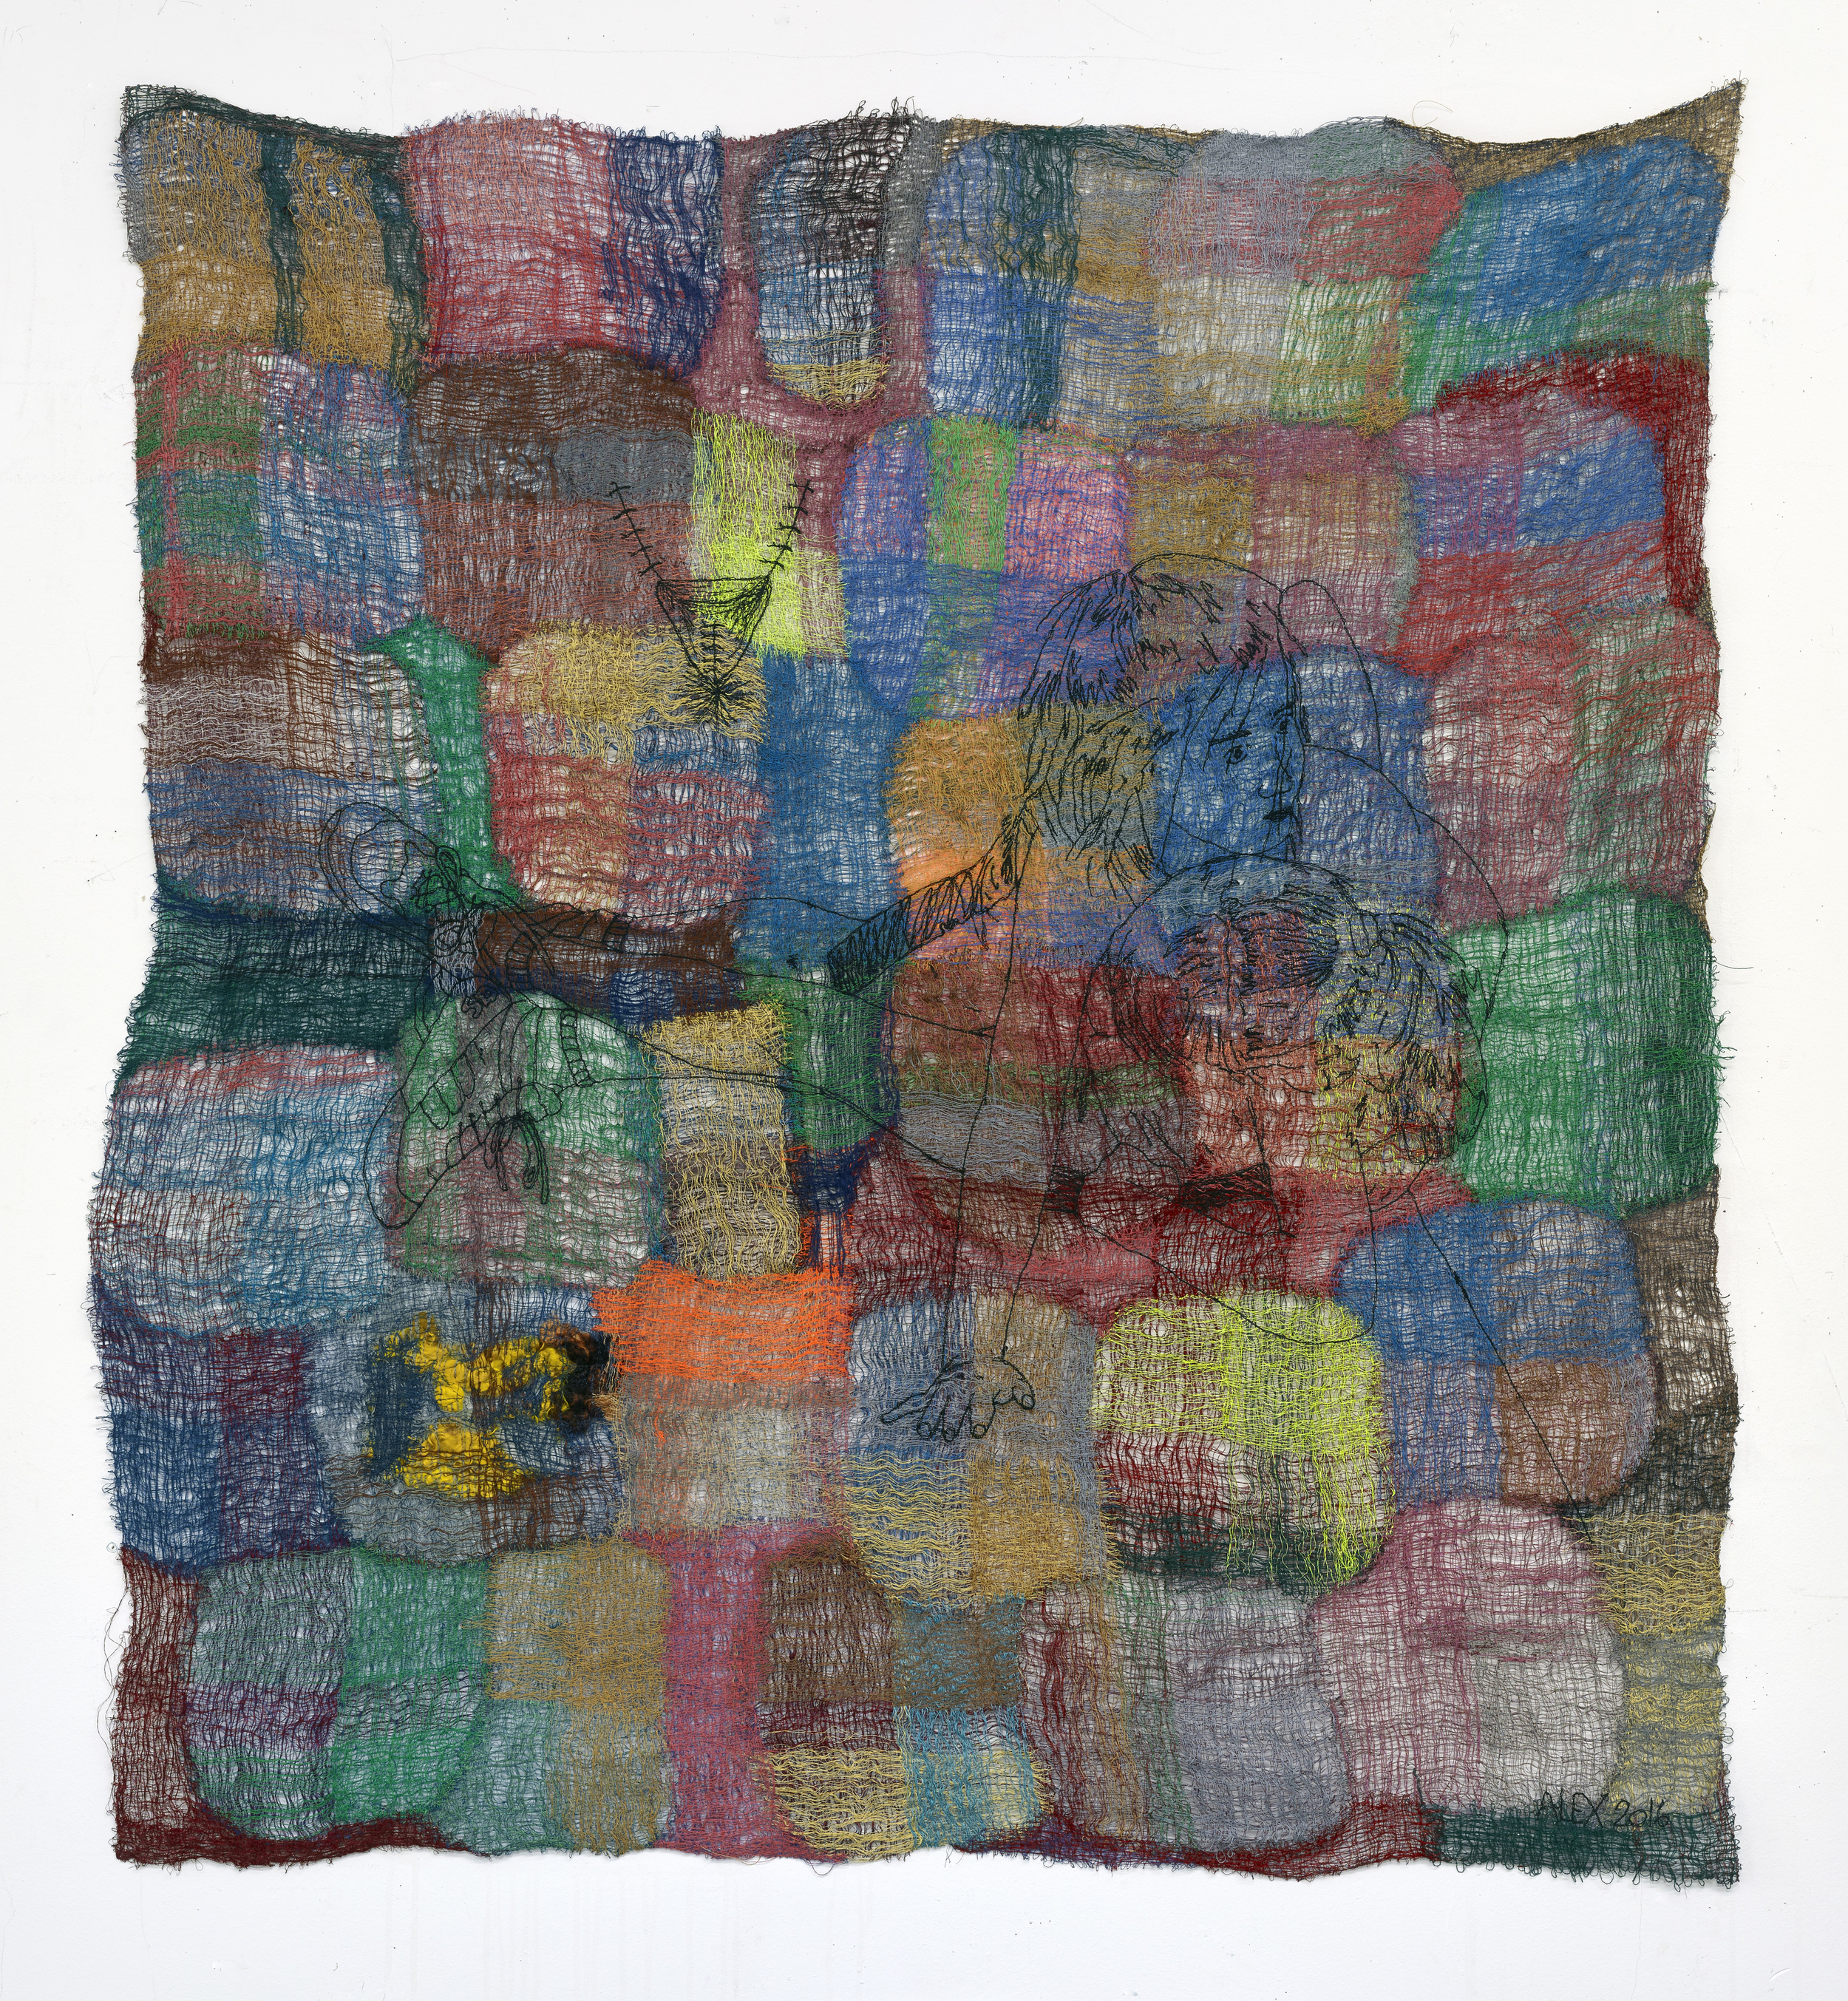     Rupture 2016 Polyester, wool, viscose 140 x 128 cm / 55.1 x 50.3 in 